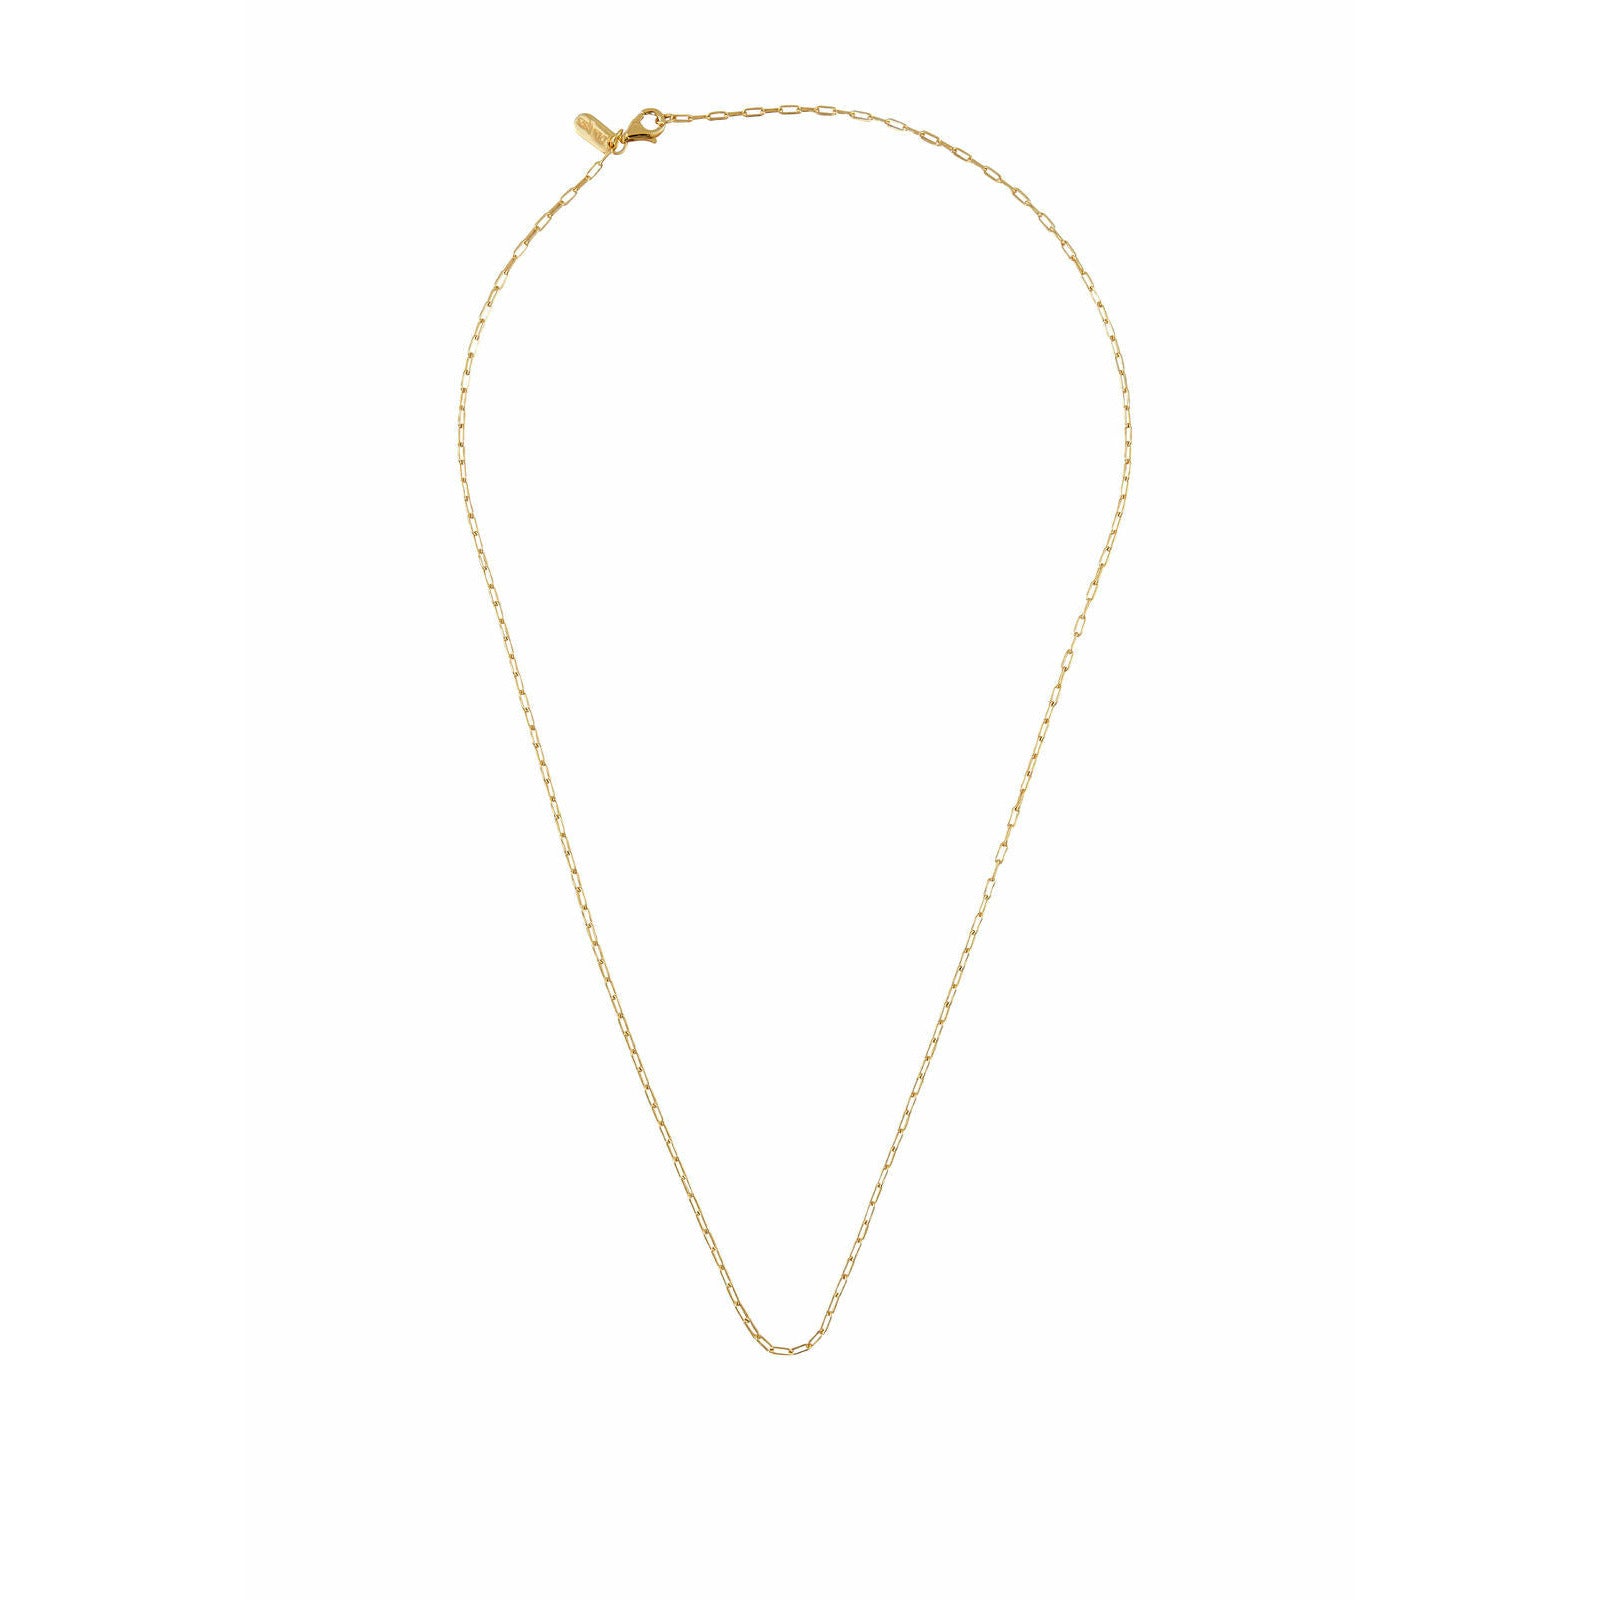 Design Letters Square Link Necklace 40 Cm, 18k Gold Plated Silver